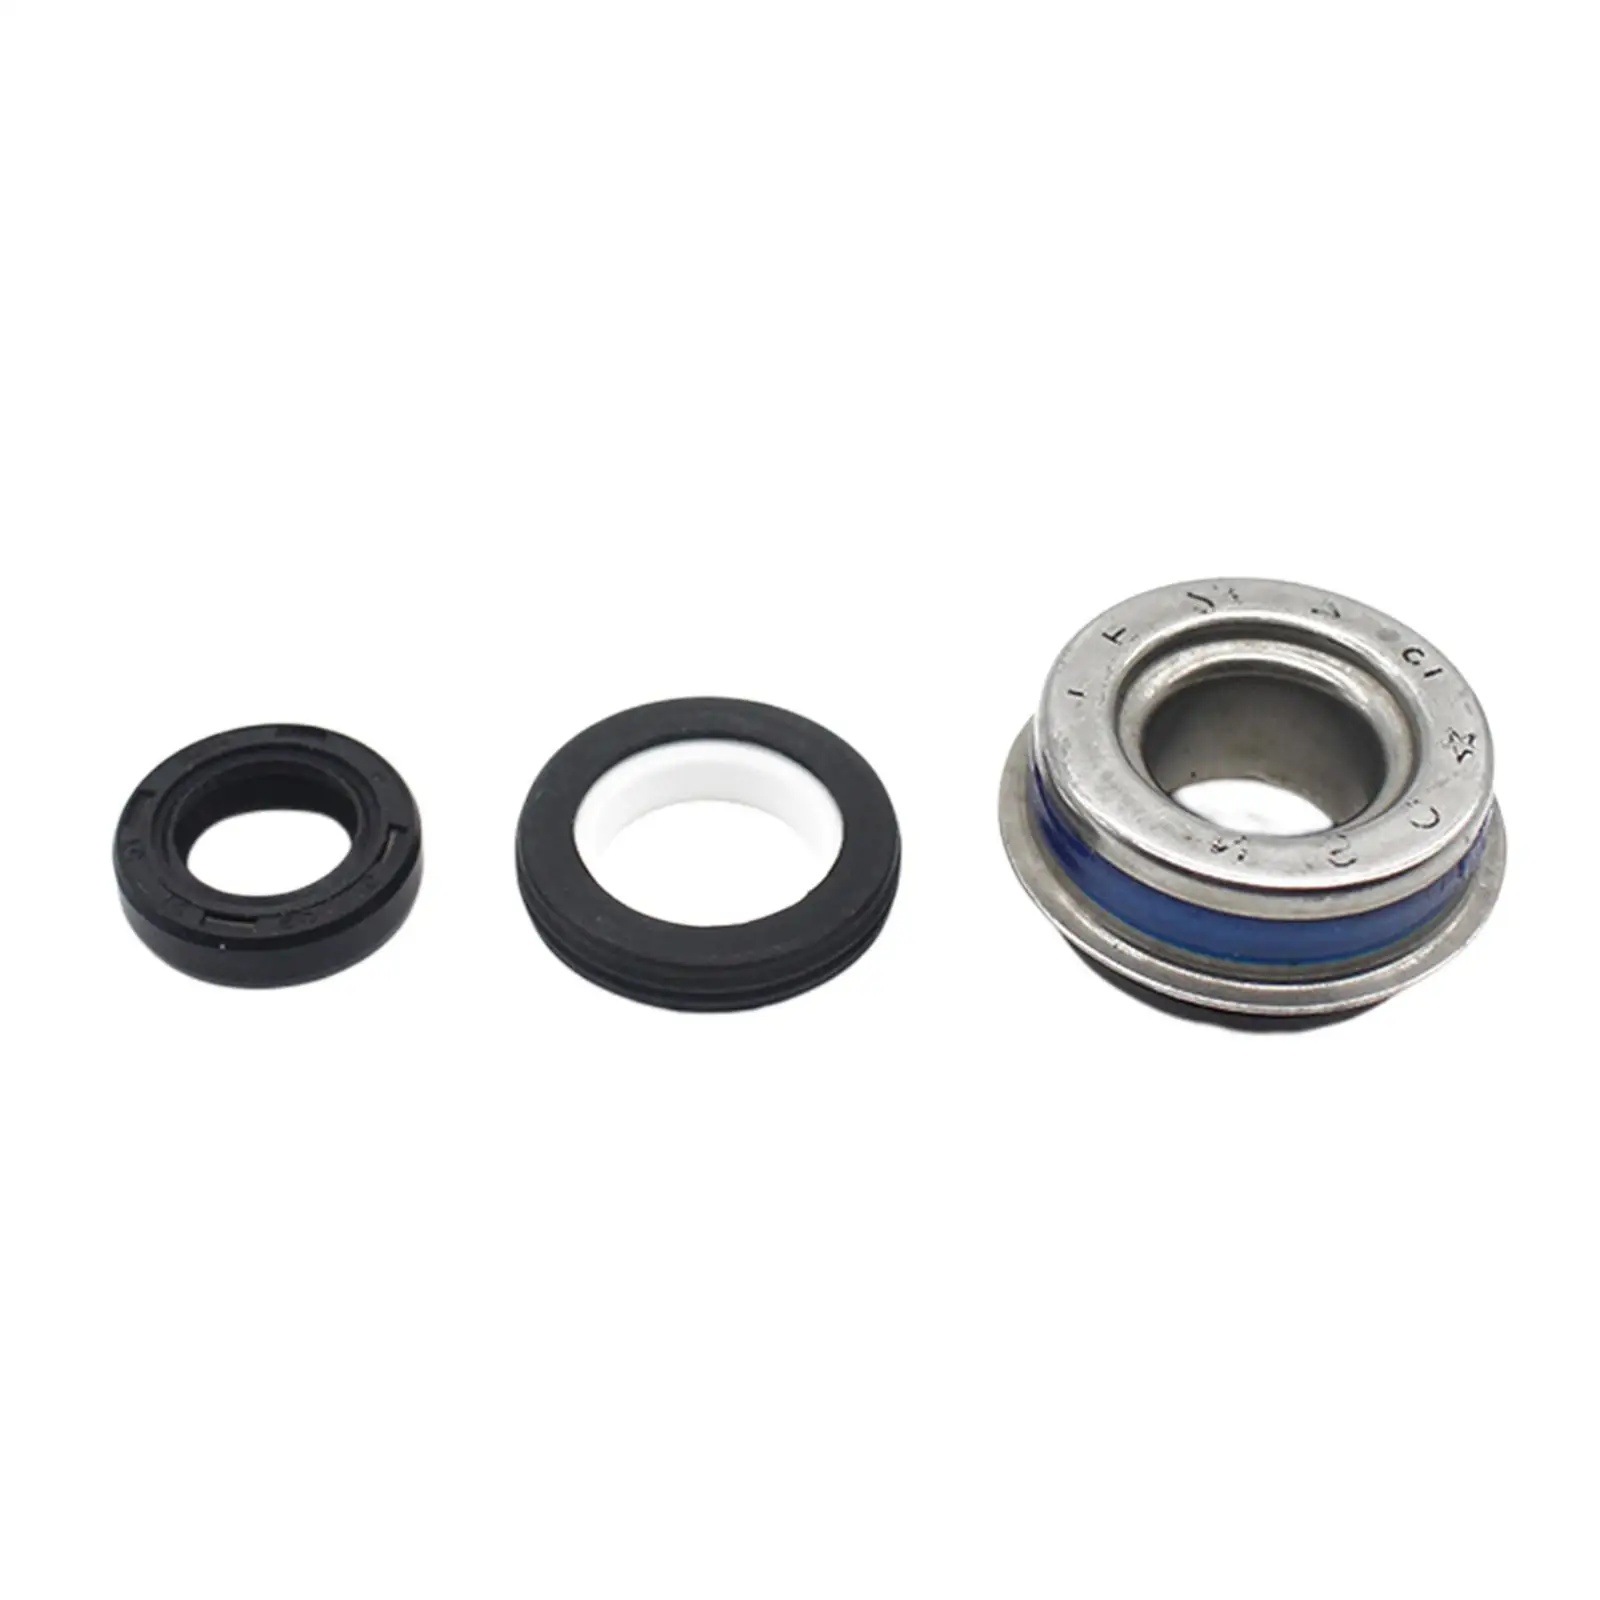 Water Pump Mechanical Seal Fits for YP500 Ab 2011 Accessories Replaces